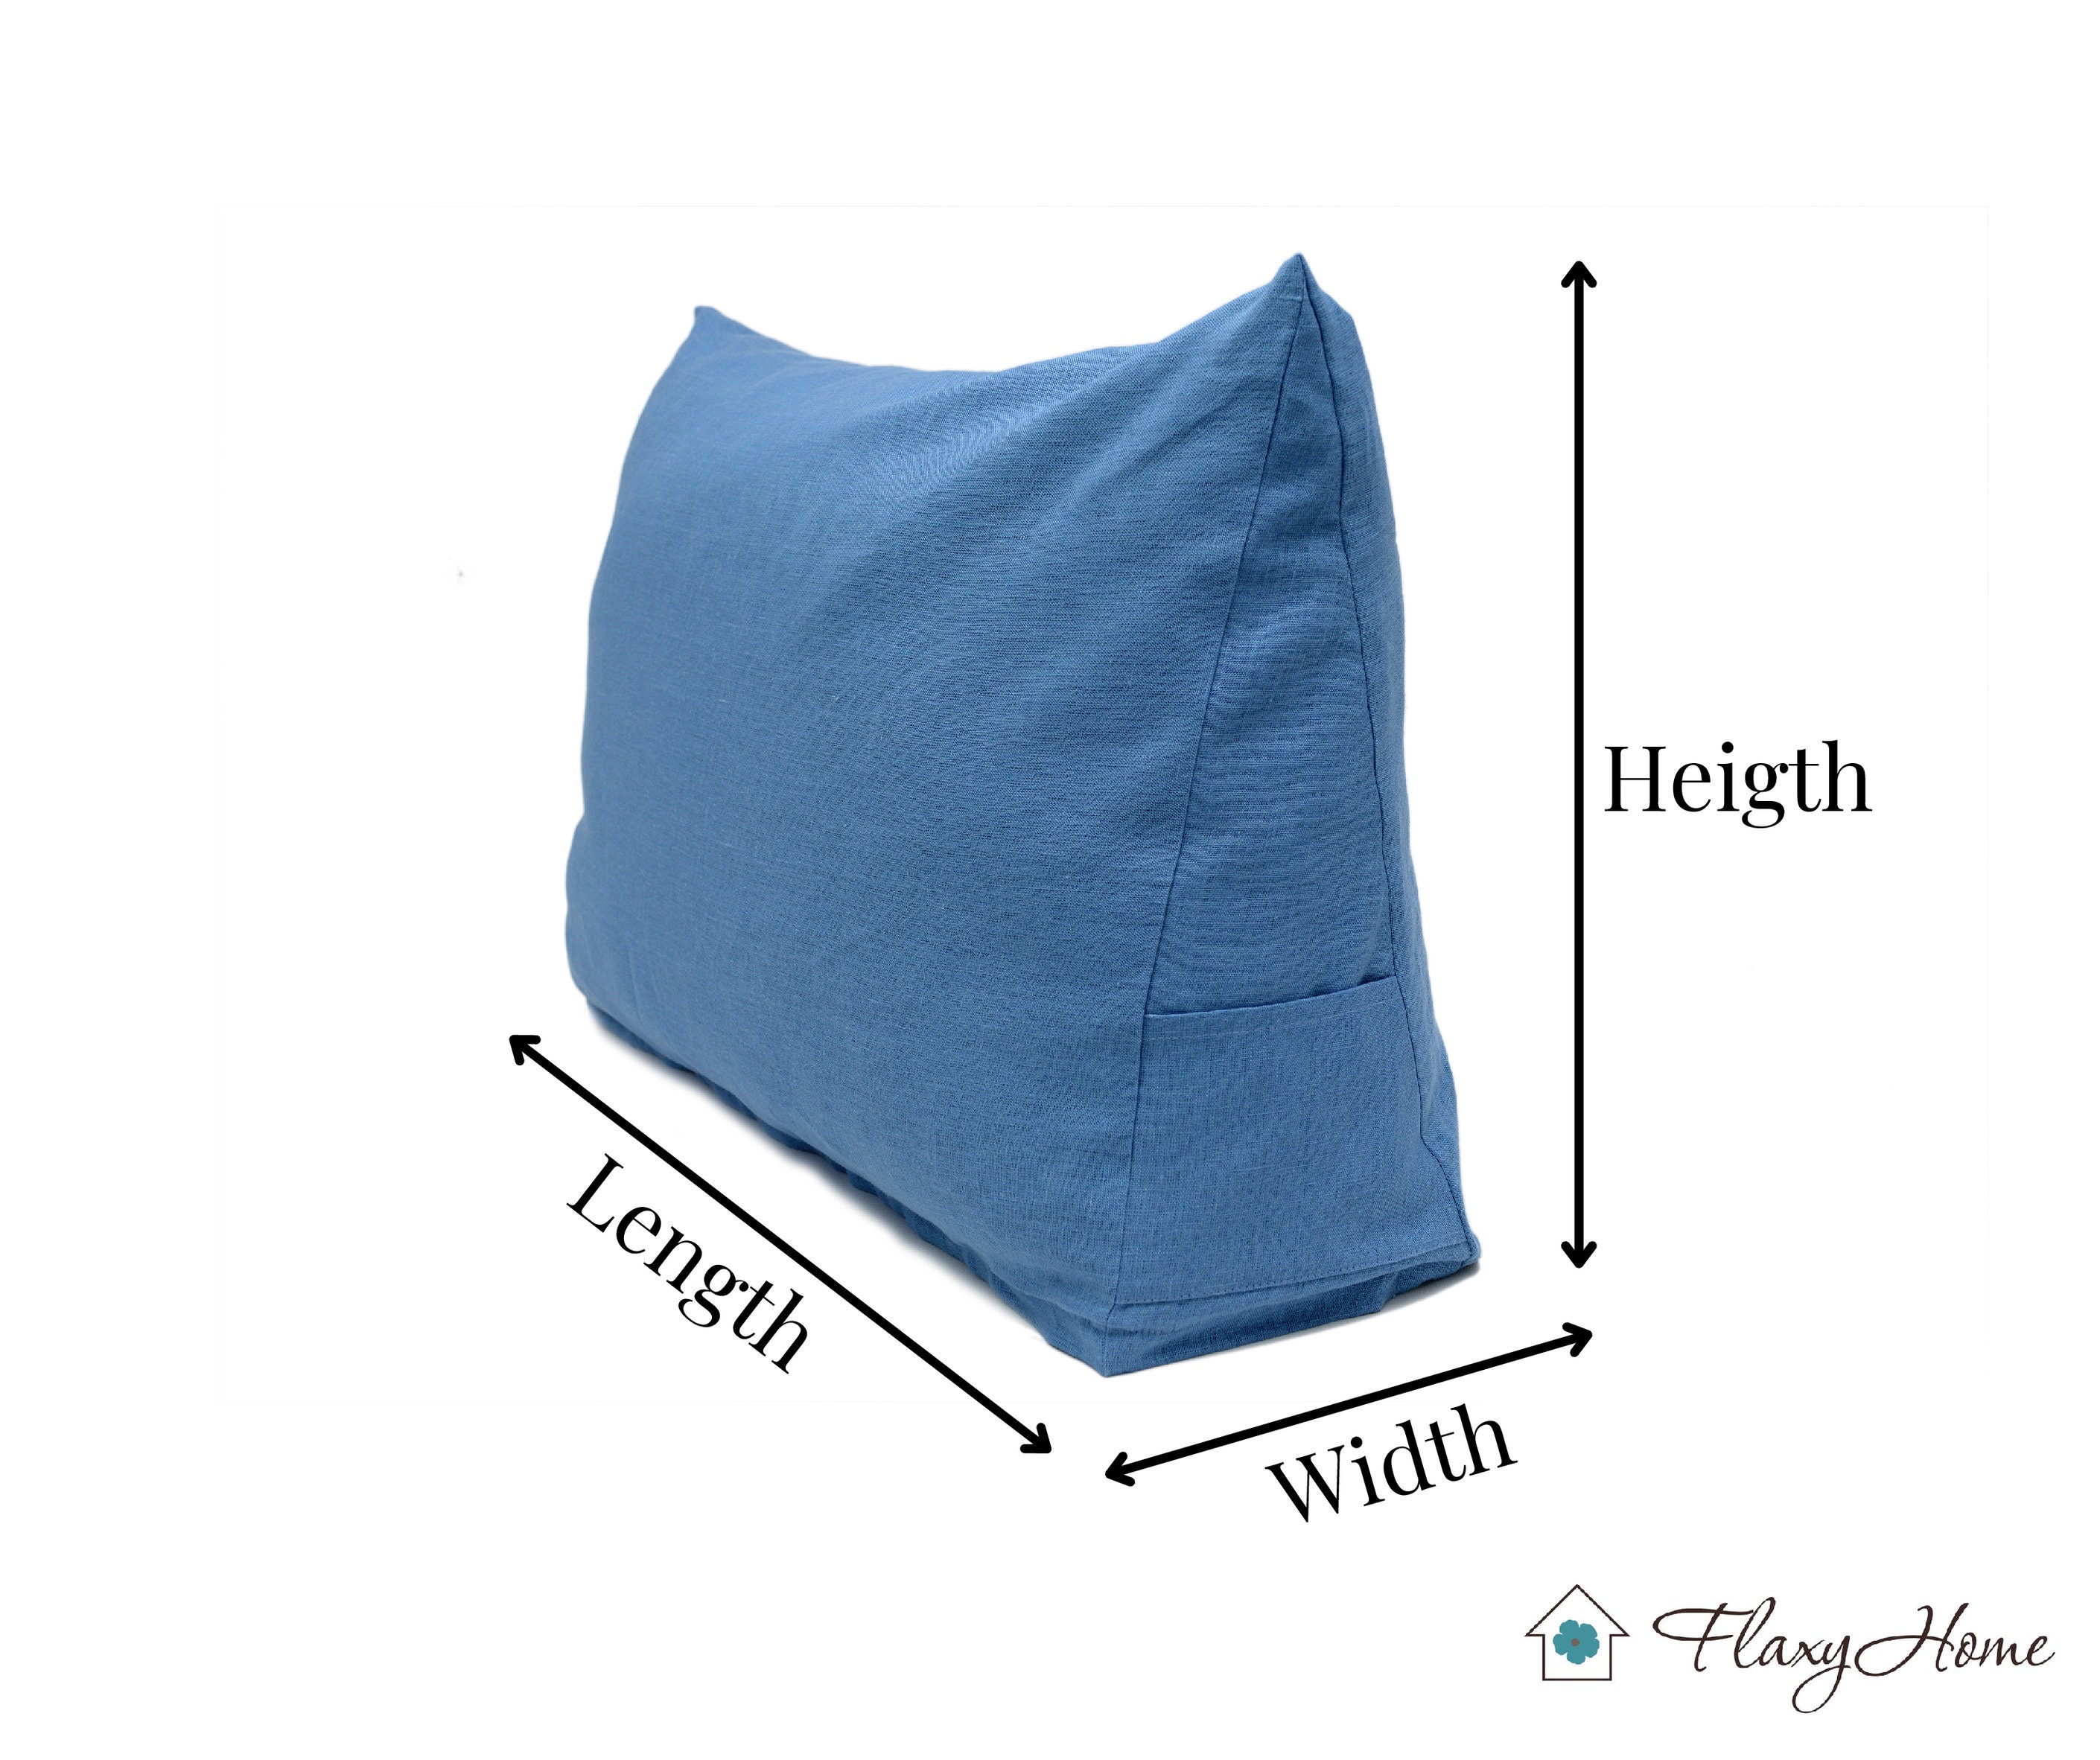 Any Size Cover for the Wedge Pillow Cotton Case Pillowcase Post Surgery  Pain Relief for Back Hip Knee Acid Reflux Snoring Sleep Apnea 